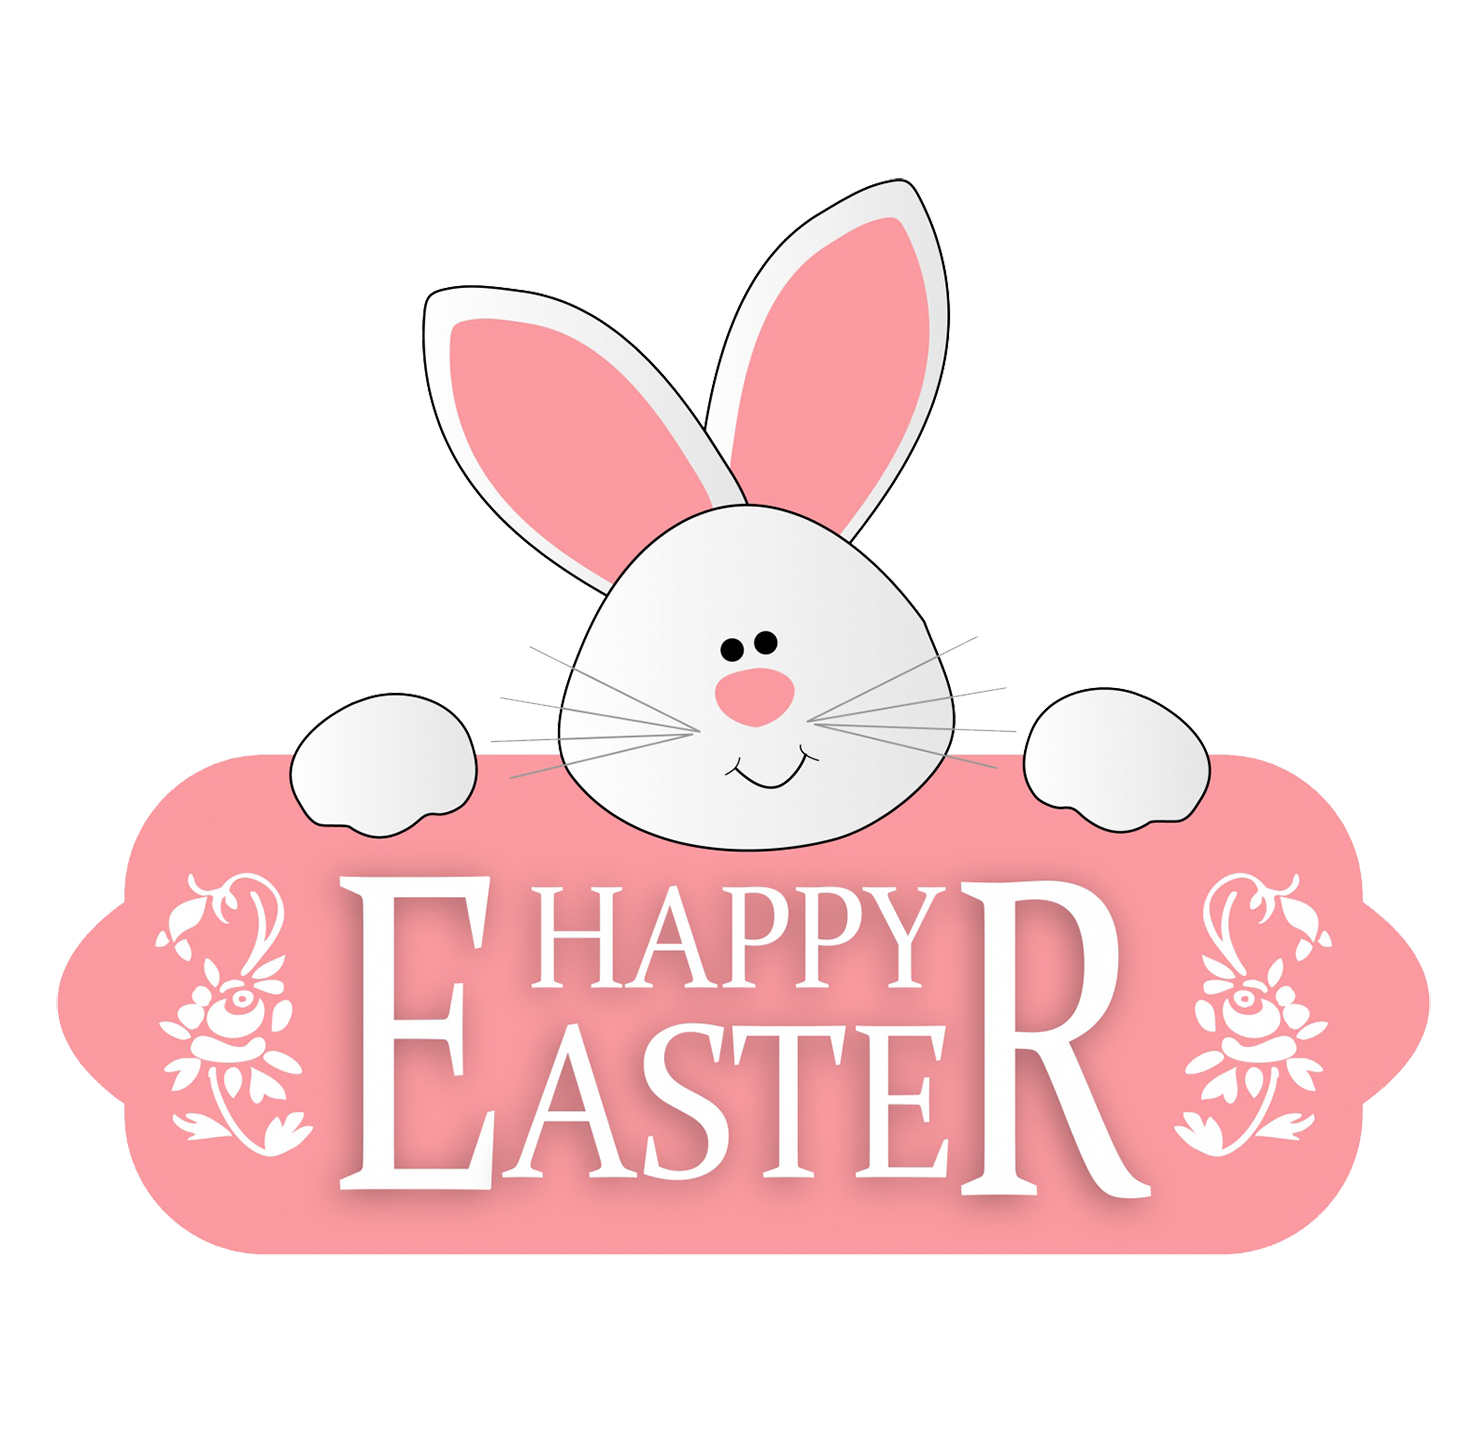 Happy Easter greeting with cute bunny banner